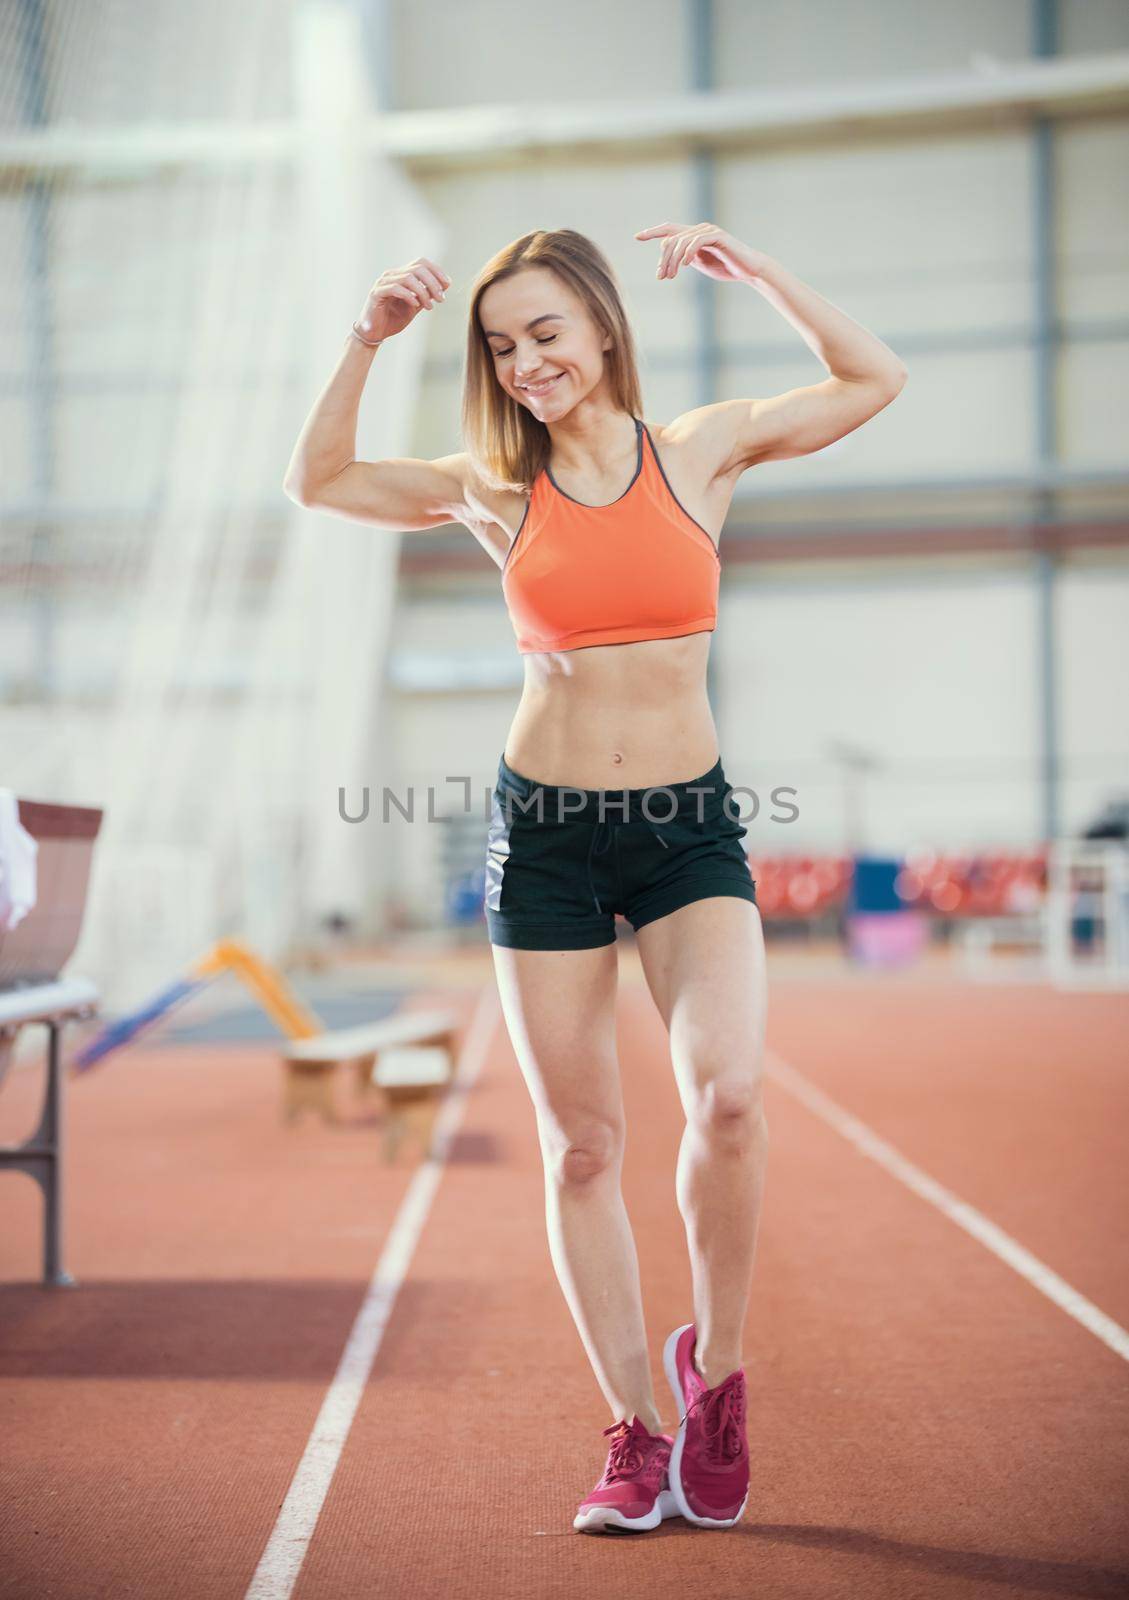 Young healthy woman in a good shape in sport shorts posing for the camera showing her muscles. Smiling. Full height